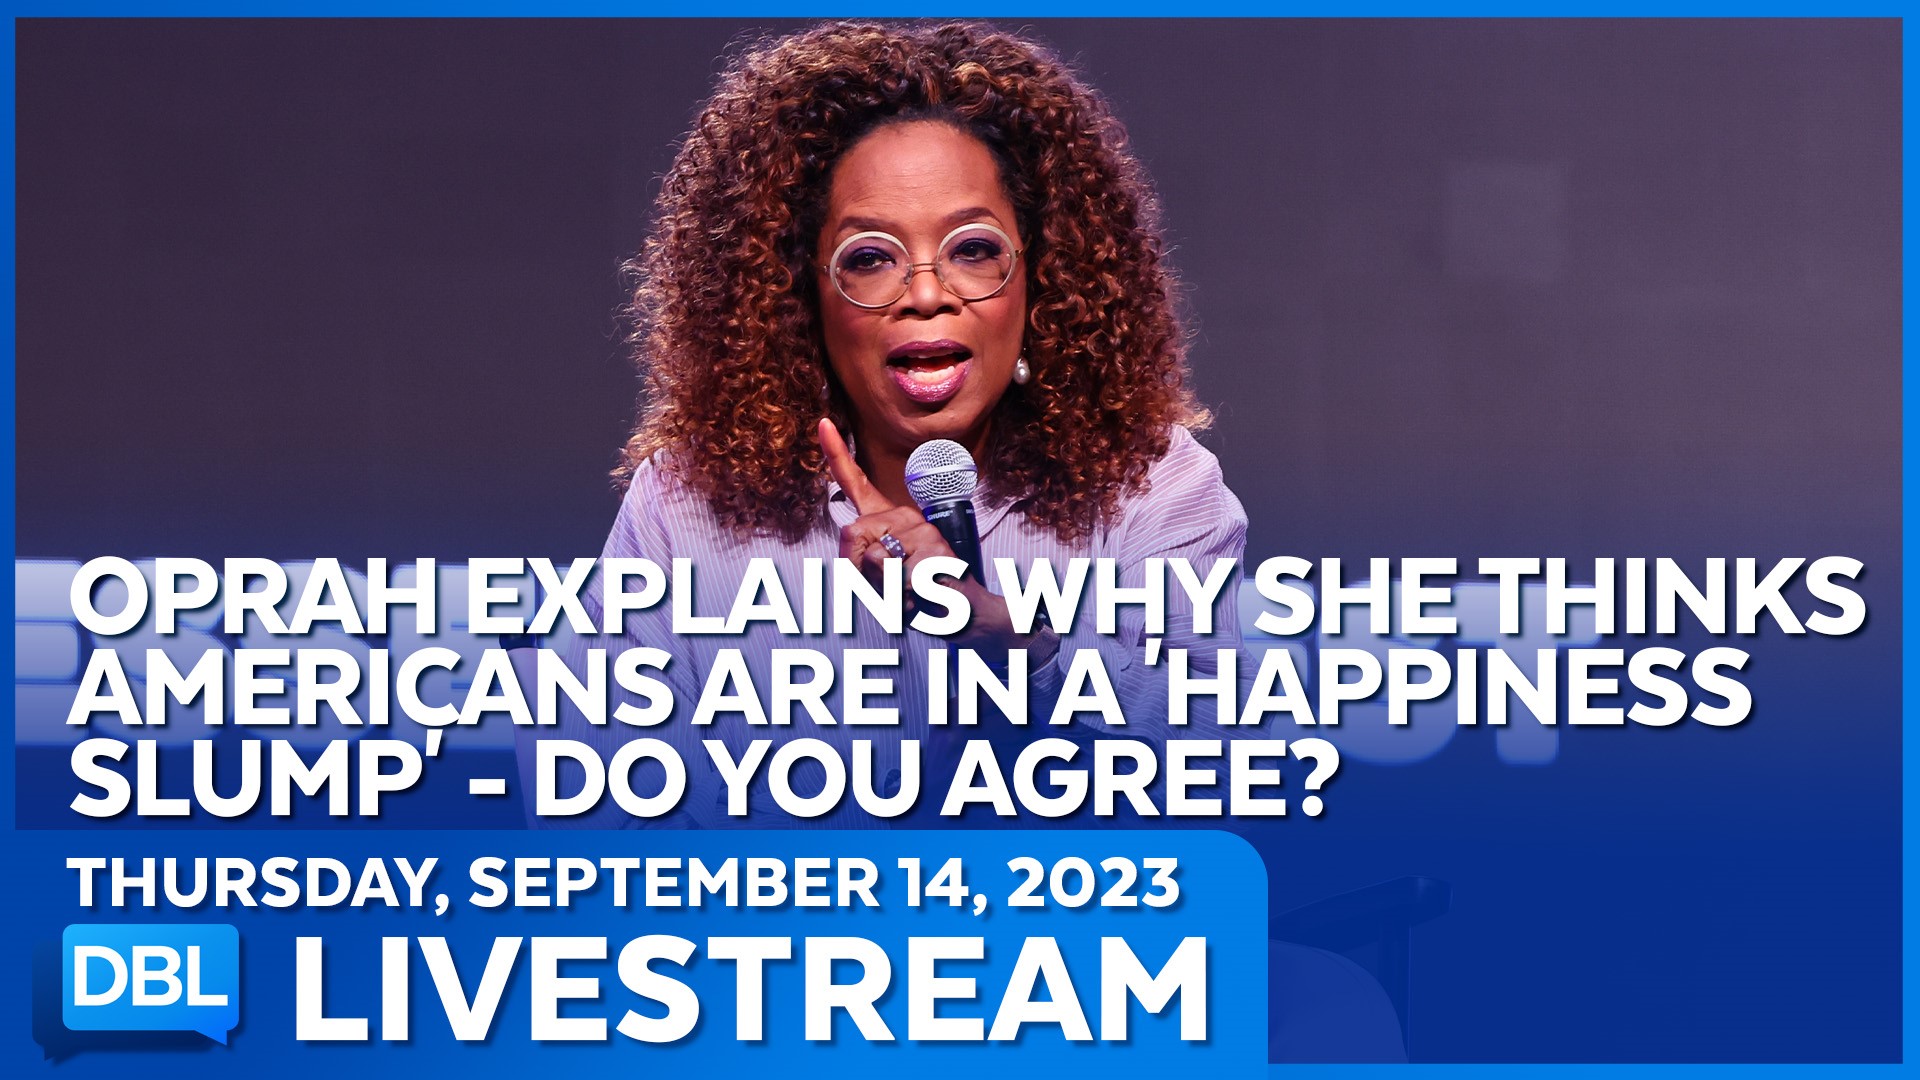 Does America Have a Happiness Problem? Oprah Seems to Think We Do